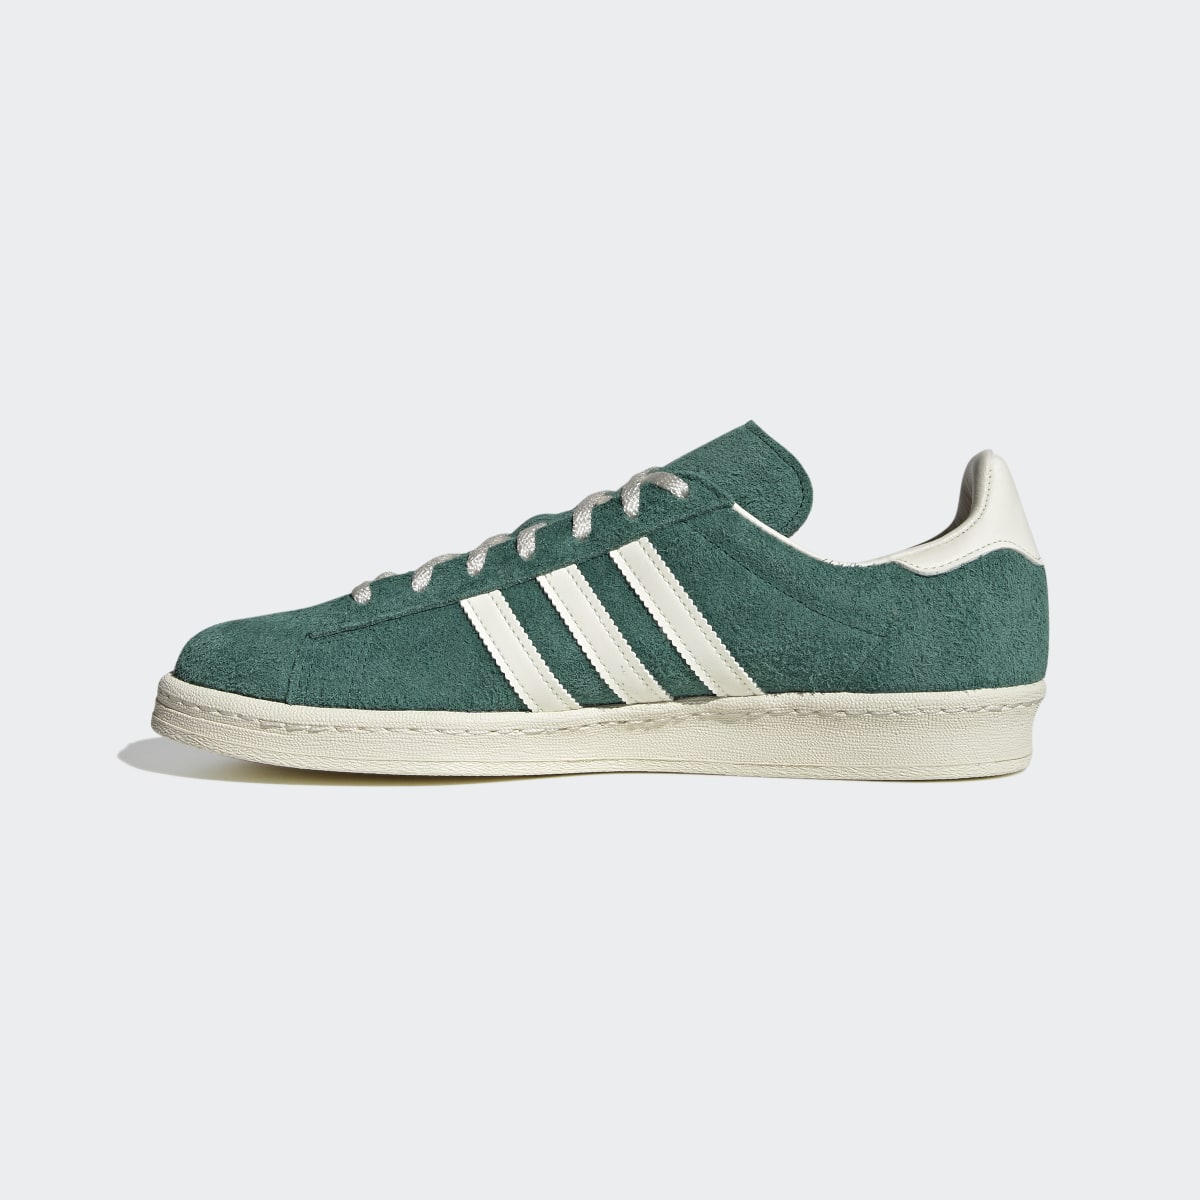 Adidas Campus 80s Shoes. 7